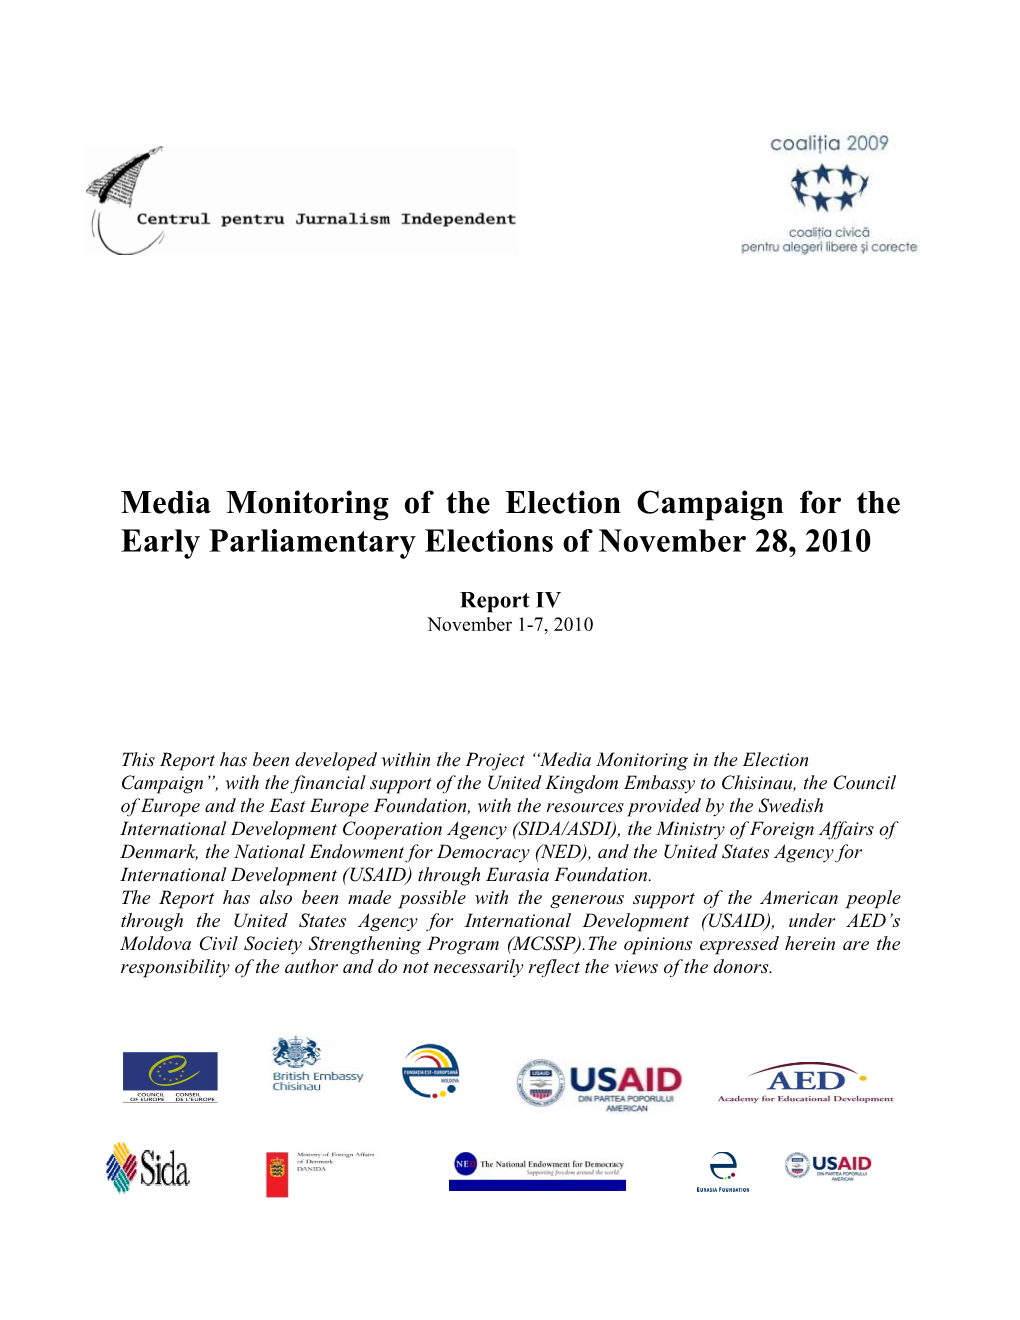 Media Monitoring of the Election Campaign for the Early Parliamentary Elections of November 28, 2010